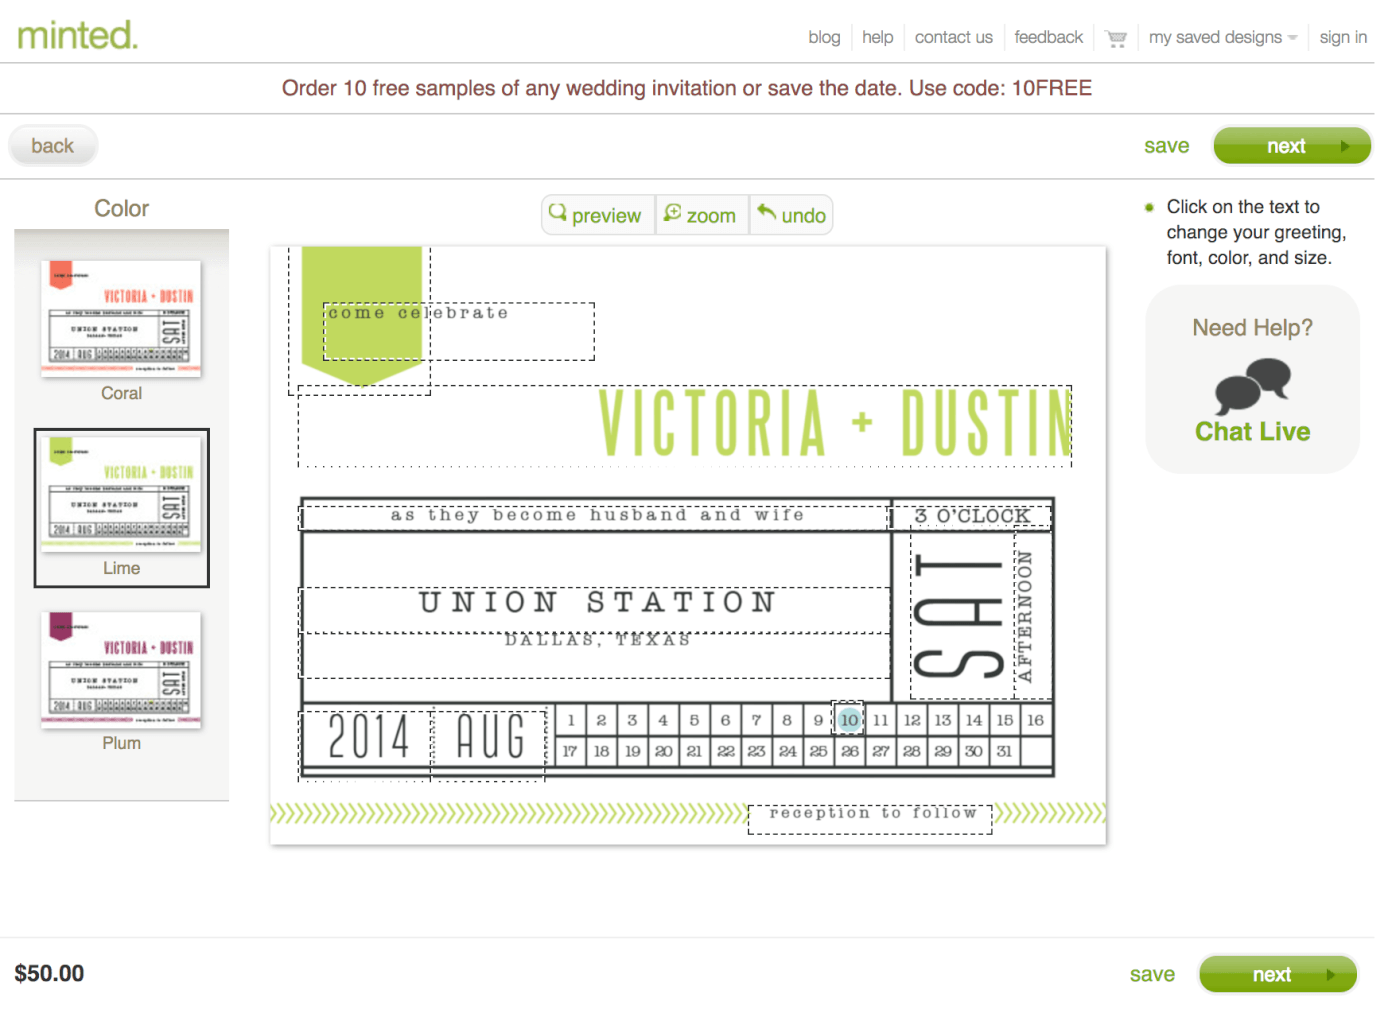 Our Printable Wedding Invitations From Minted -- so easy to use, and they looked like train tickets! | gimmesomeoven.com